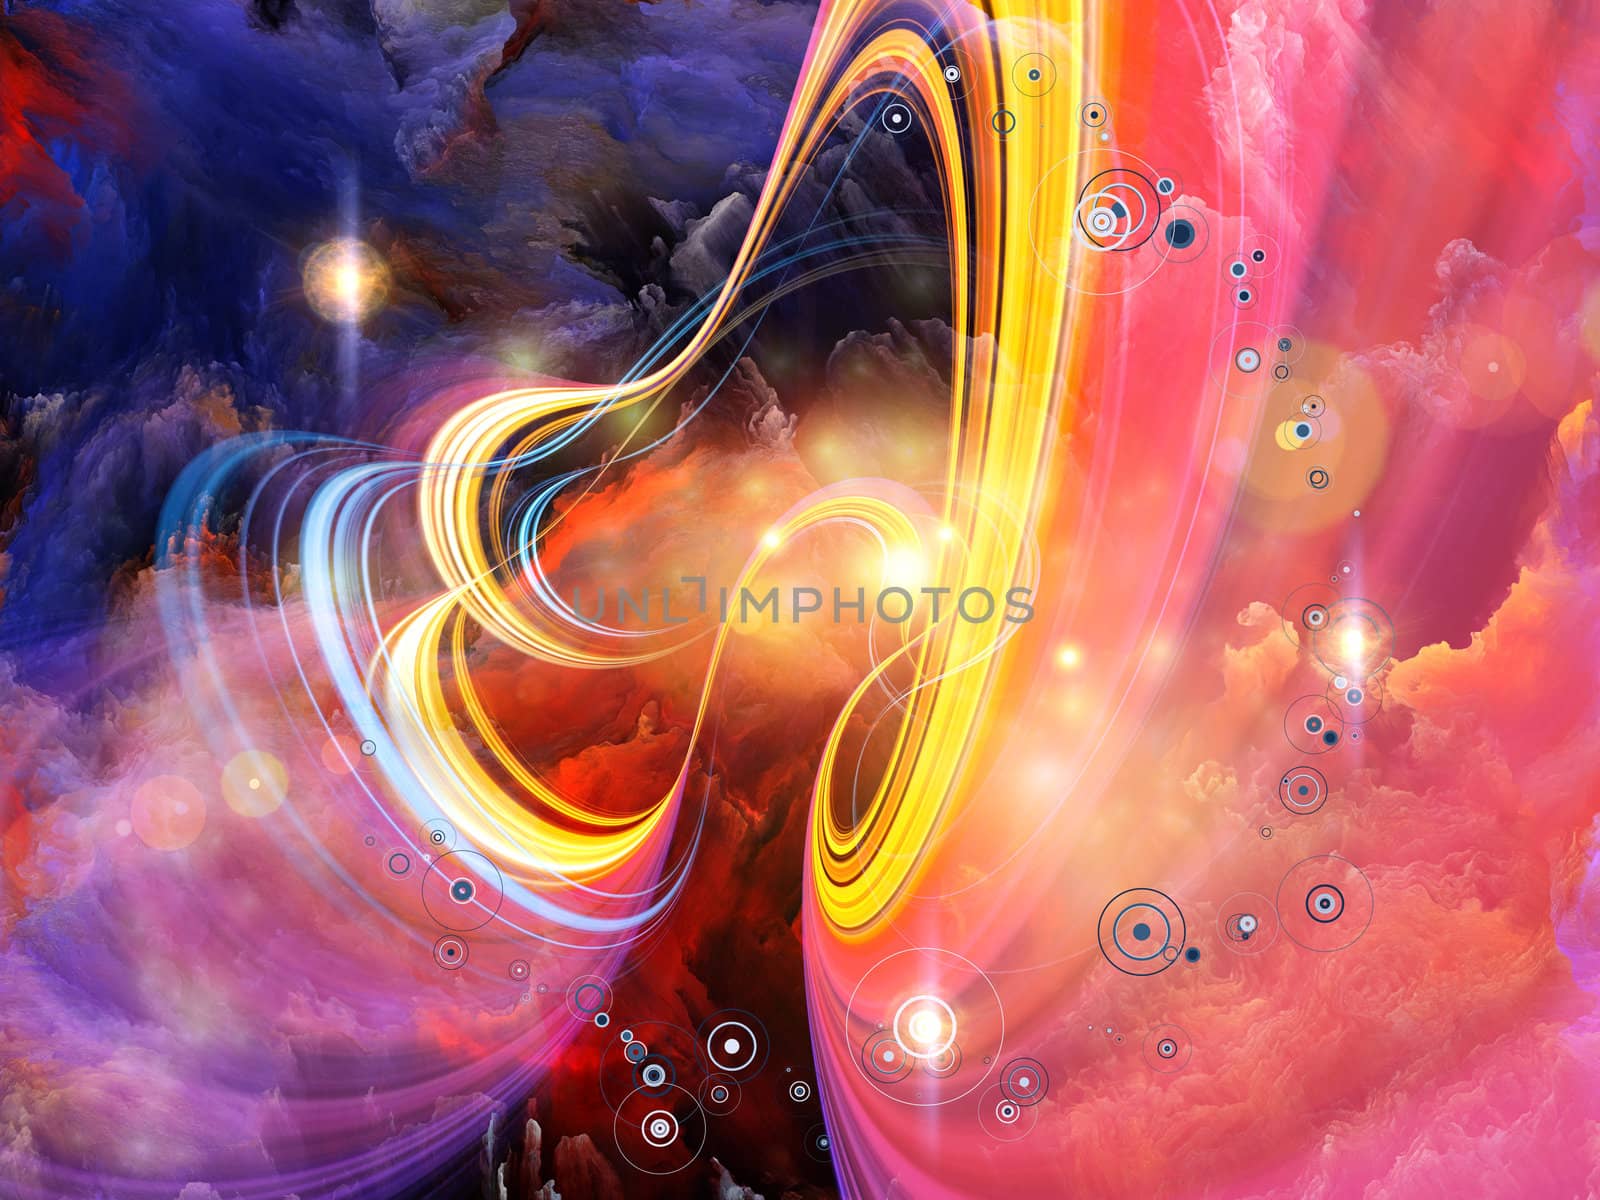 Abstract landscape of colorful fractal foam, light trails and lights suitable as a backdrop for art, music, fantasy and imagination related projects